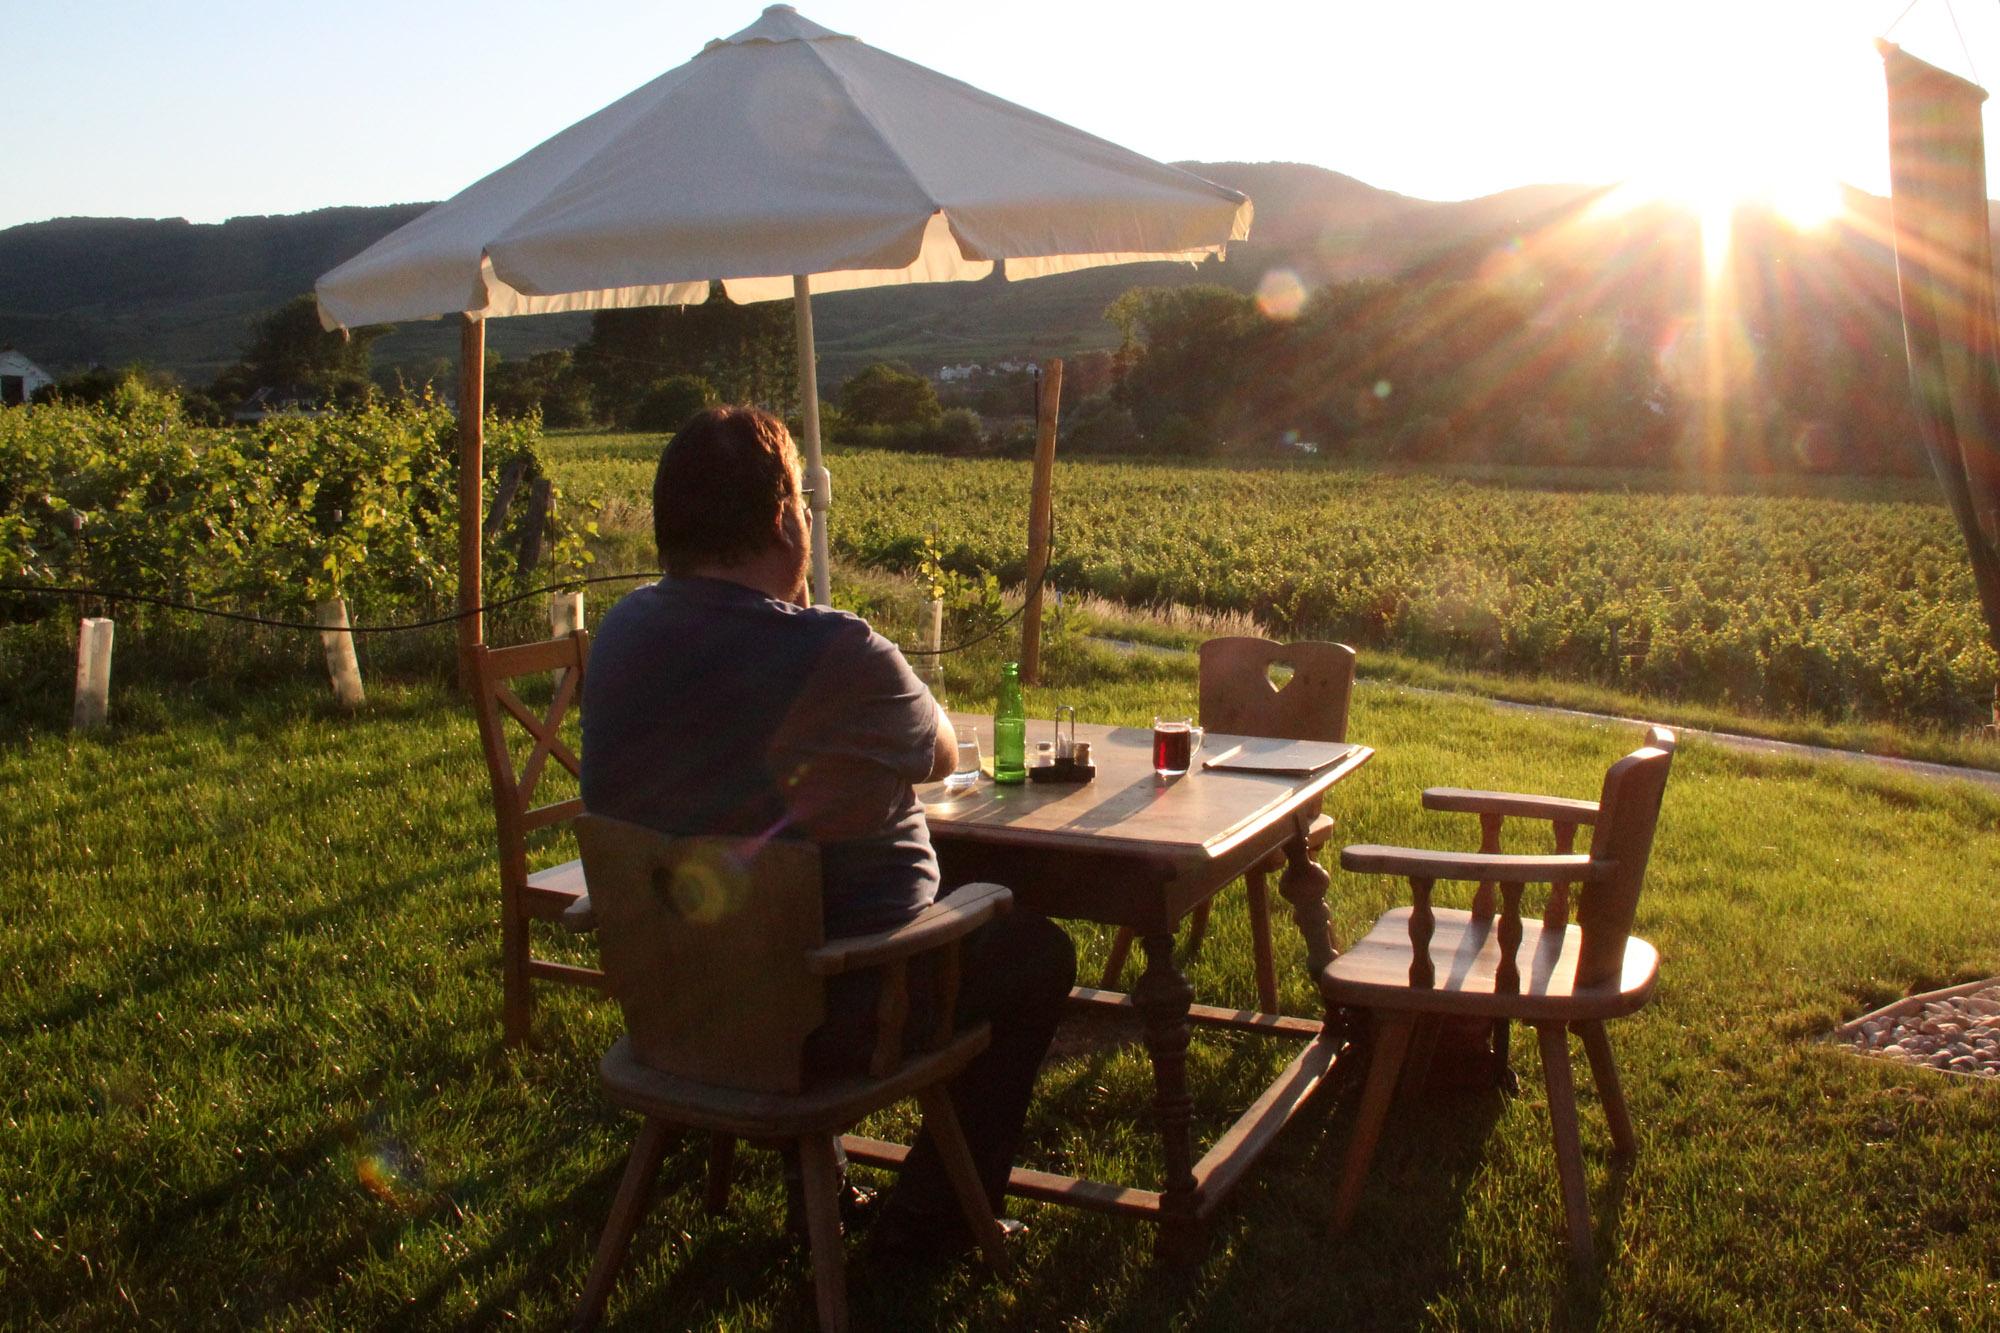 Some Heurigen offer you seating in the garden where you may feel like you're in the middle of the vineyards while enjoying the local wines. – © Anna Lun